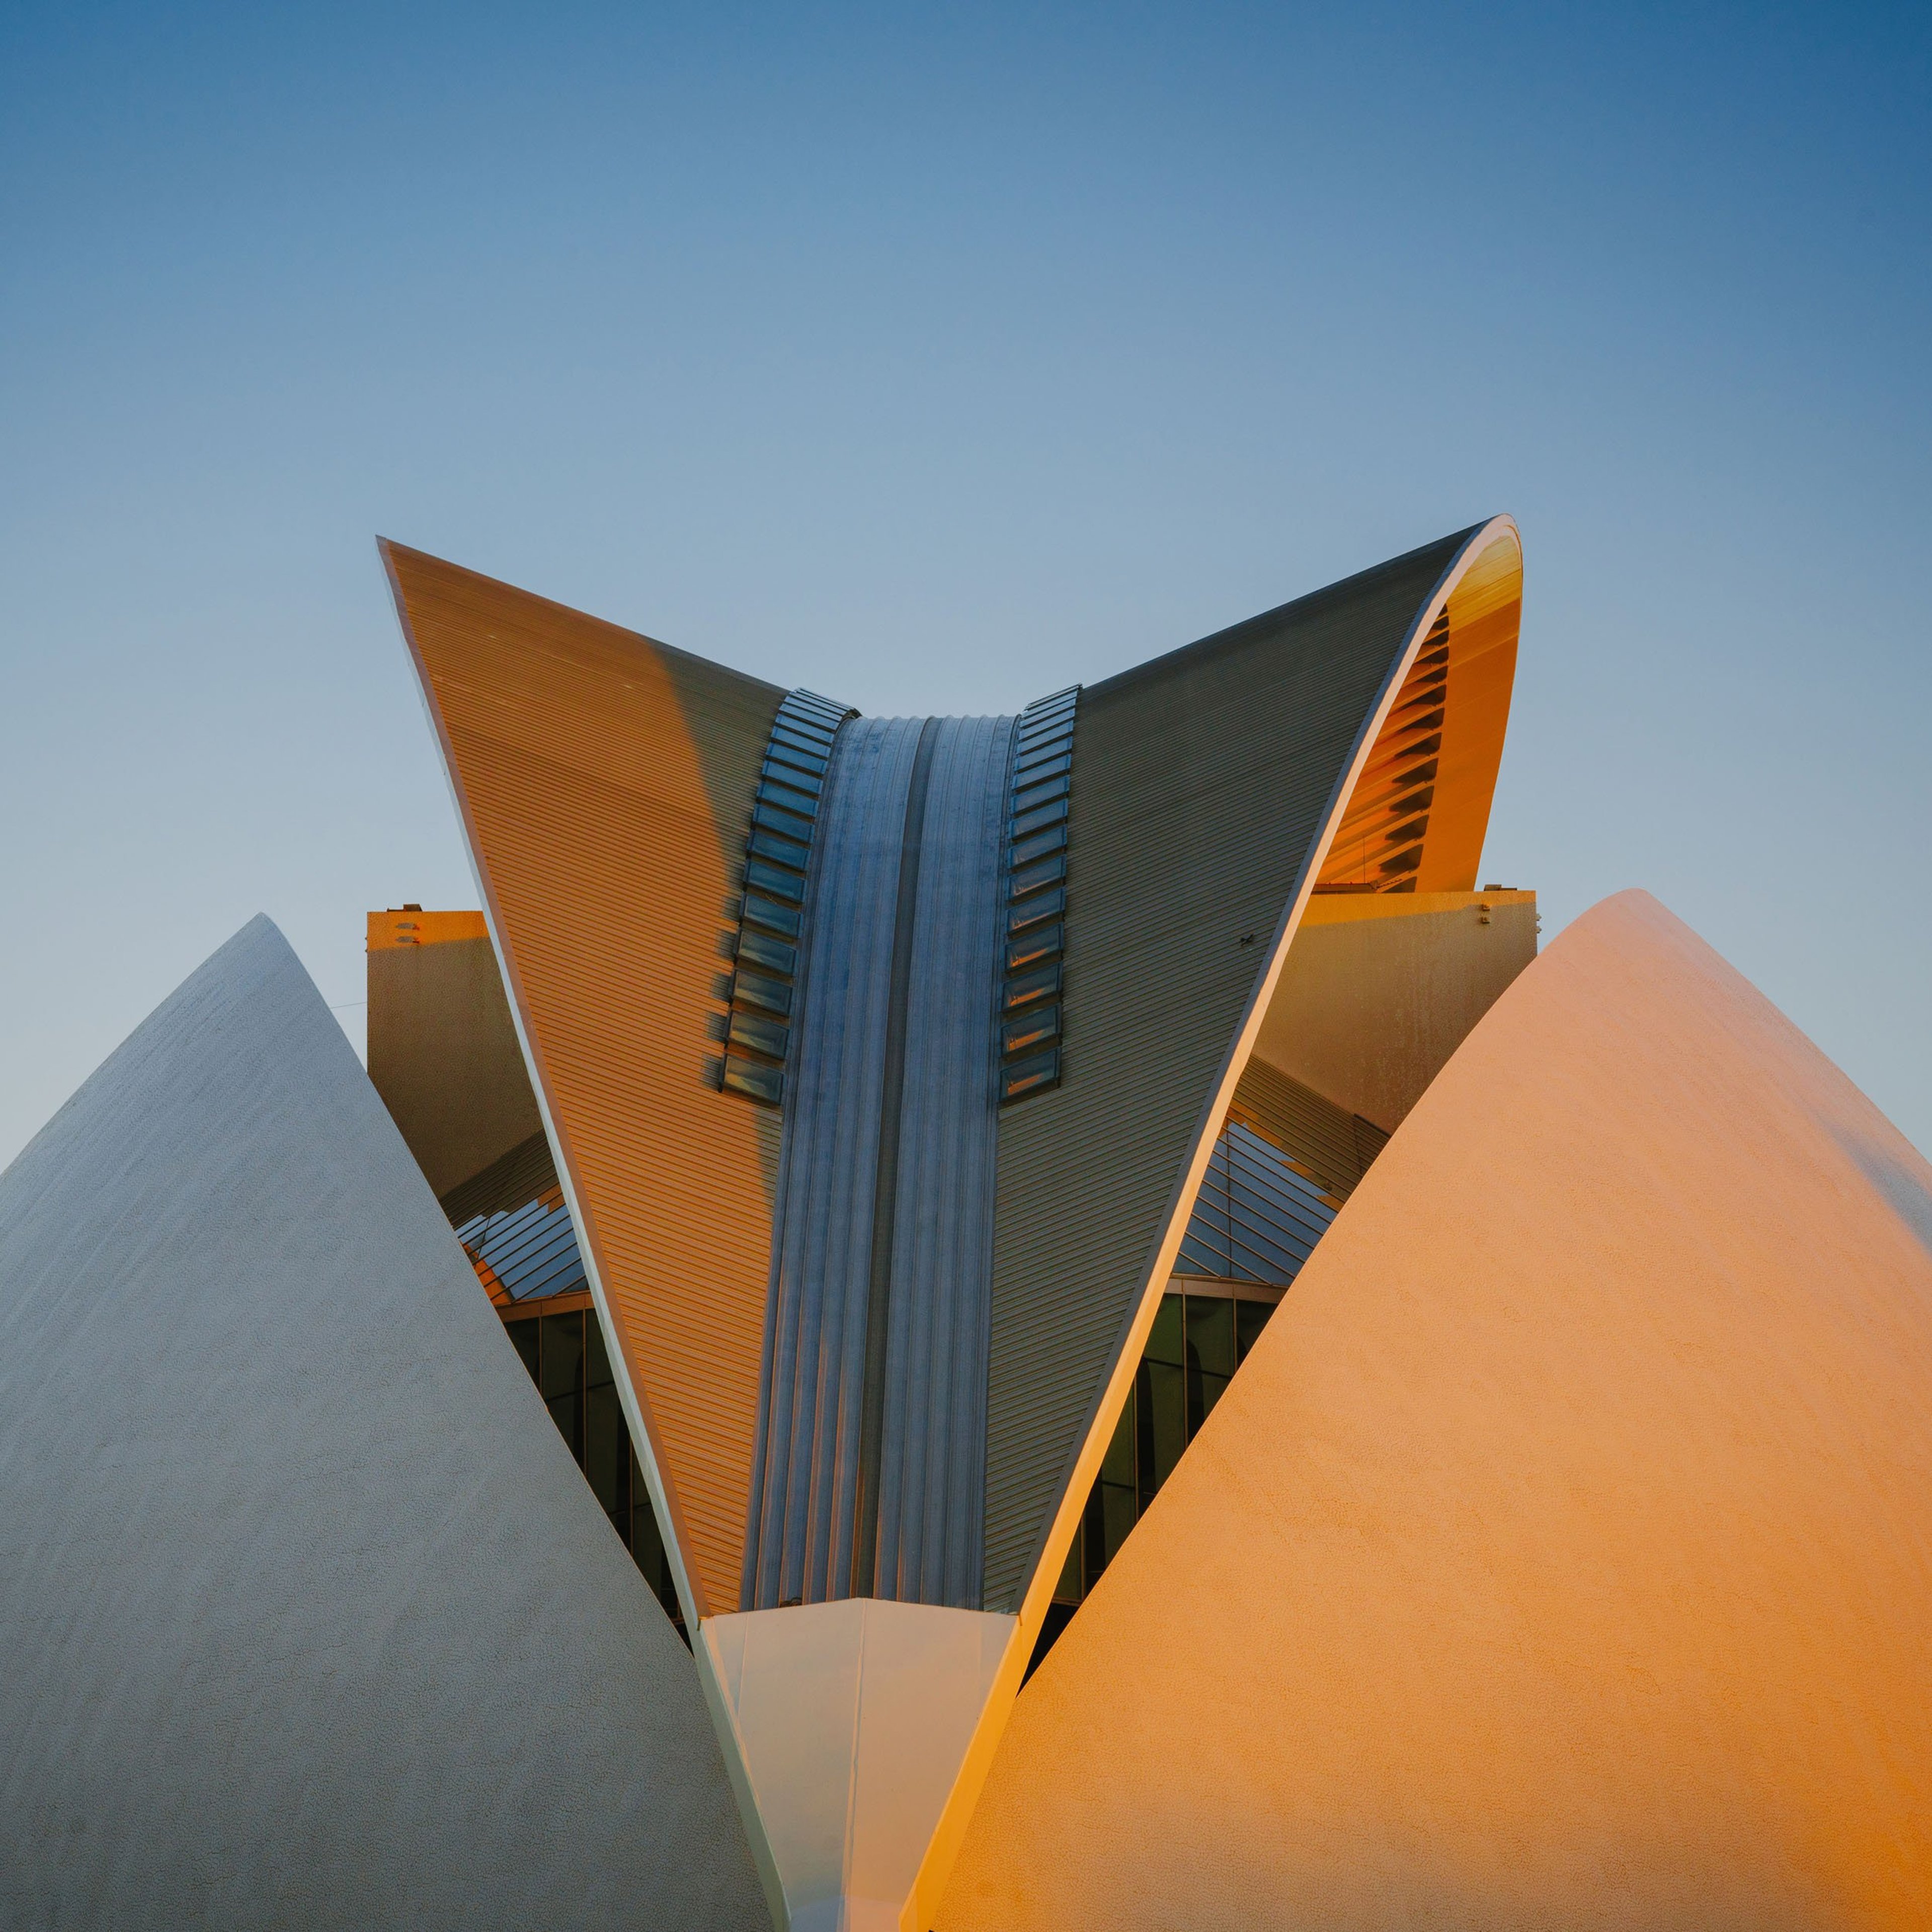 The Valencia City of Arts and Sciences at sunset.